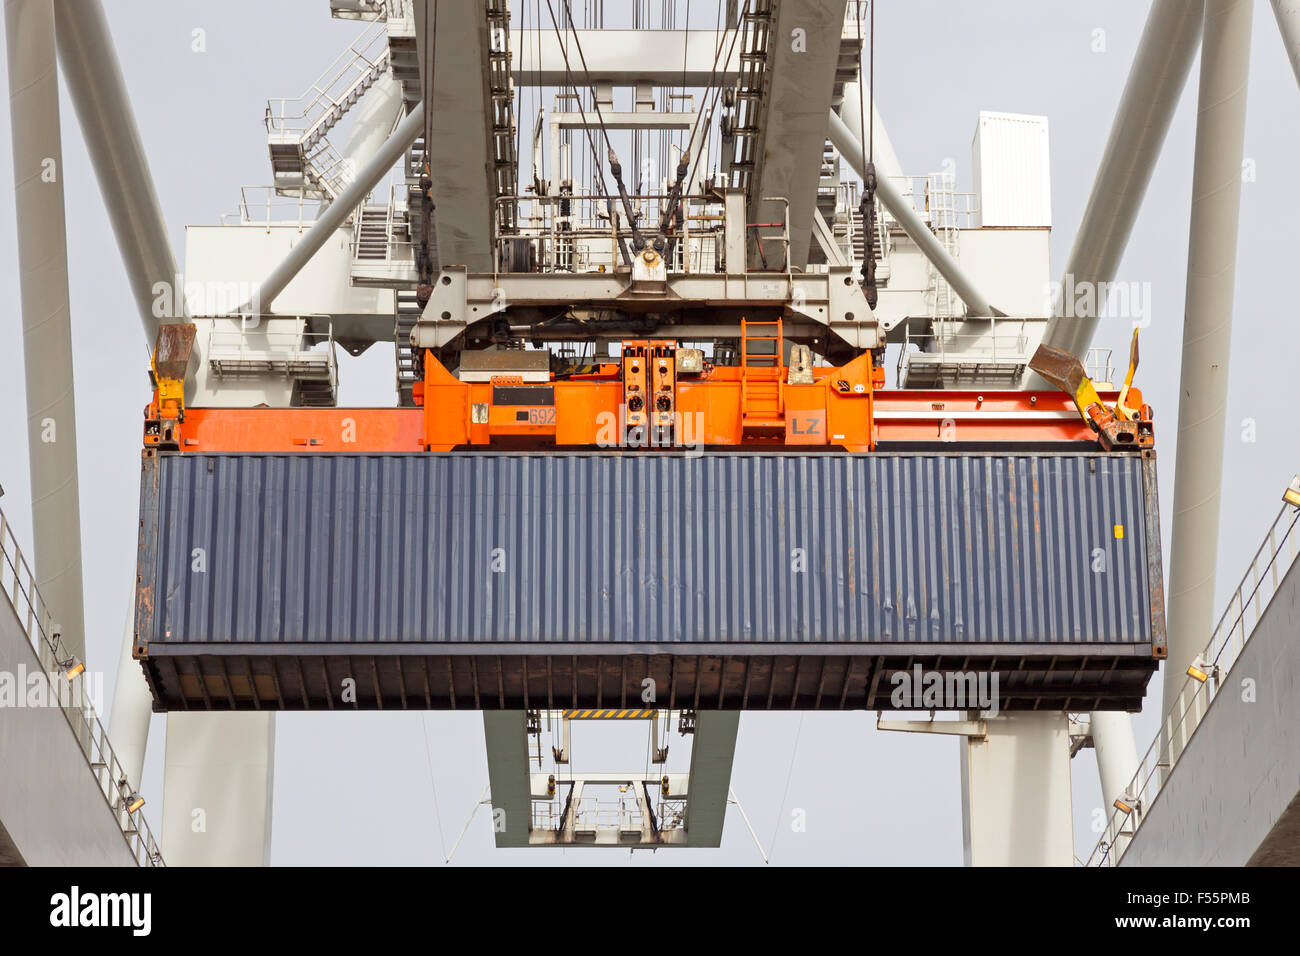 Sea container lifted by a harbor crane Stock Photo